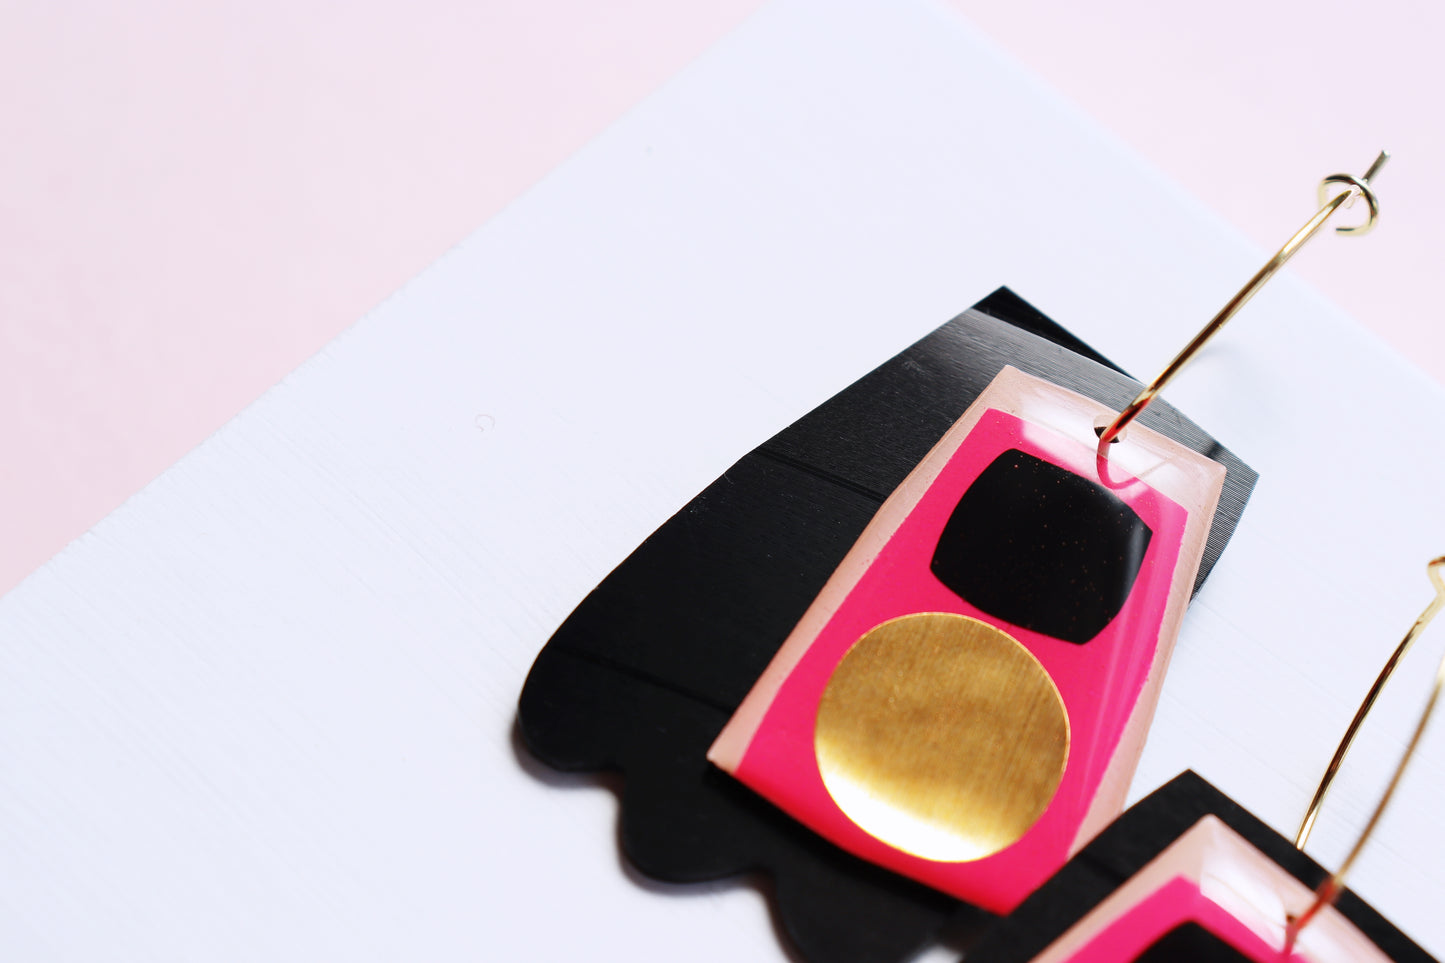 LAST PAIR / FROUFROU no. 2 in hot pink and gold / recycled vinyl jewellery